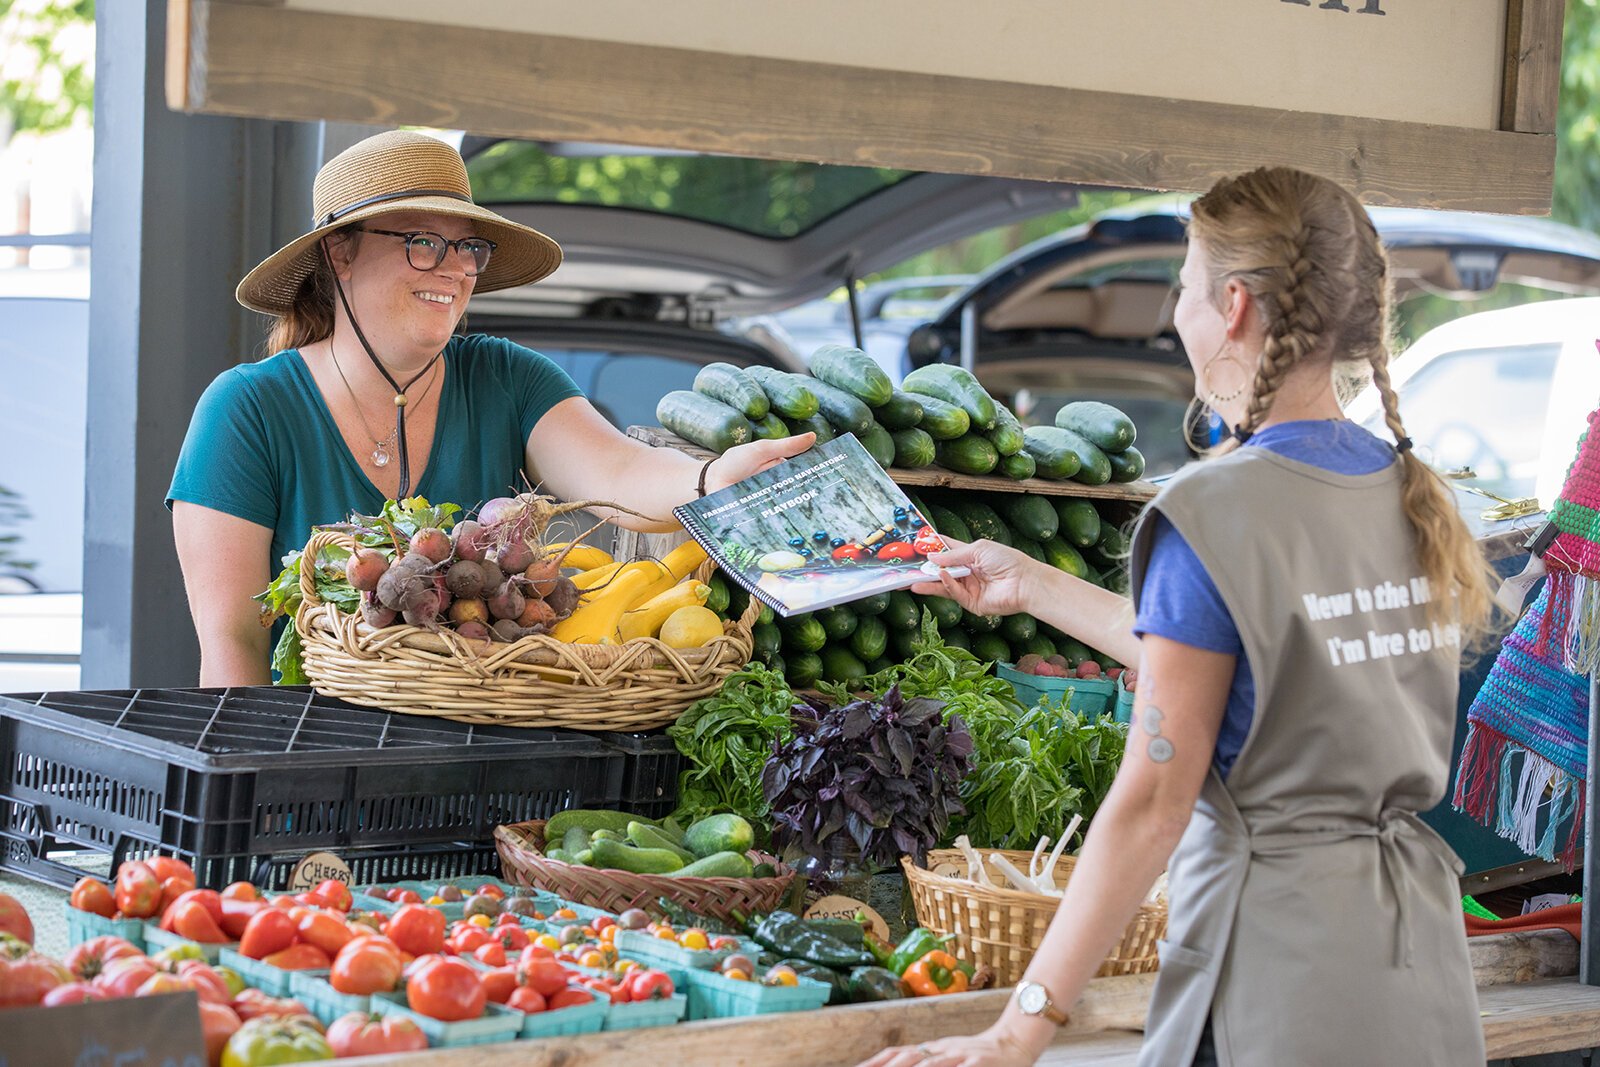 A Farmers Market Food Navigator interacts with a market patron.